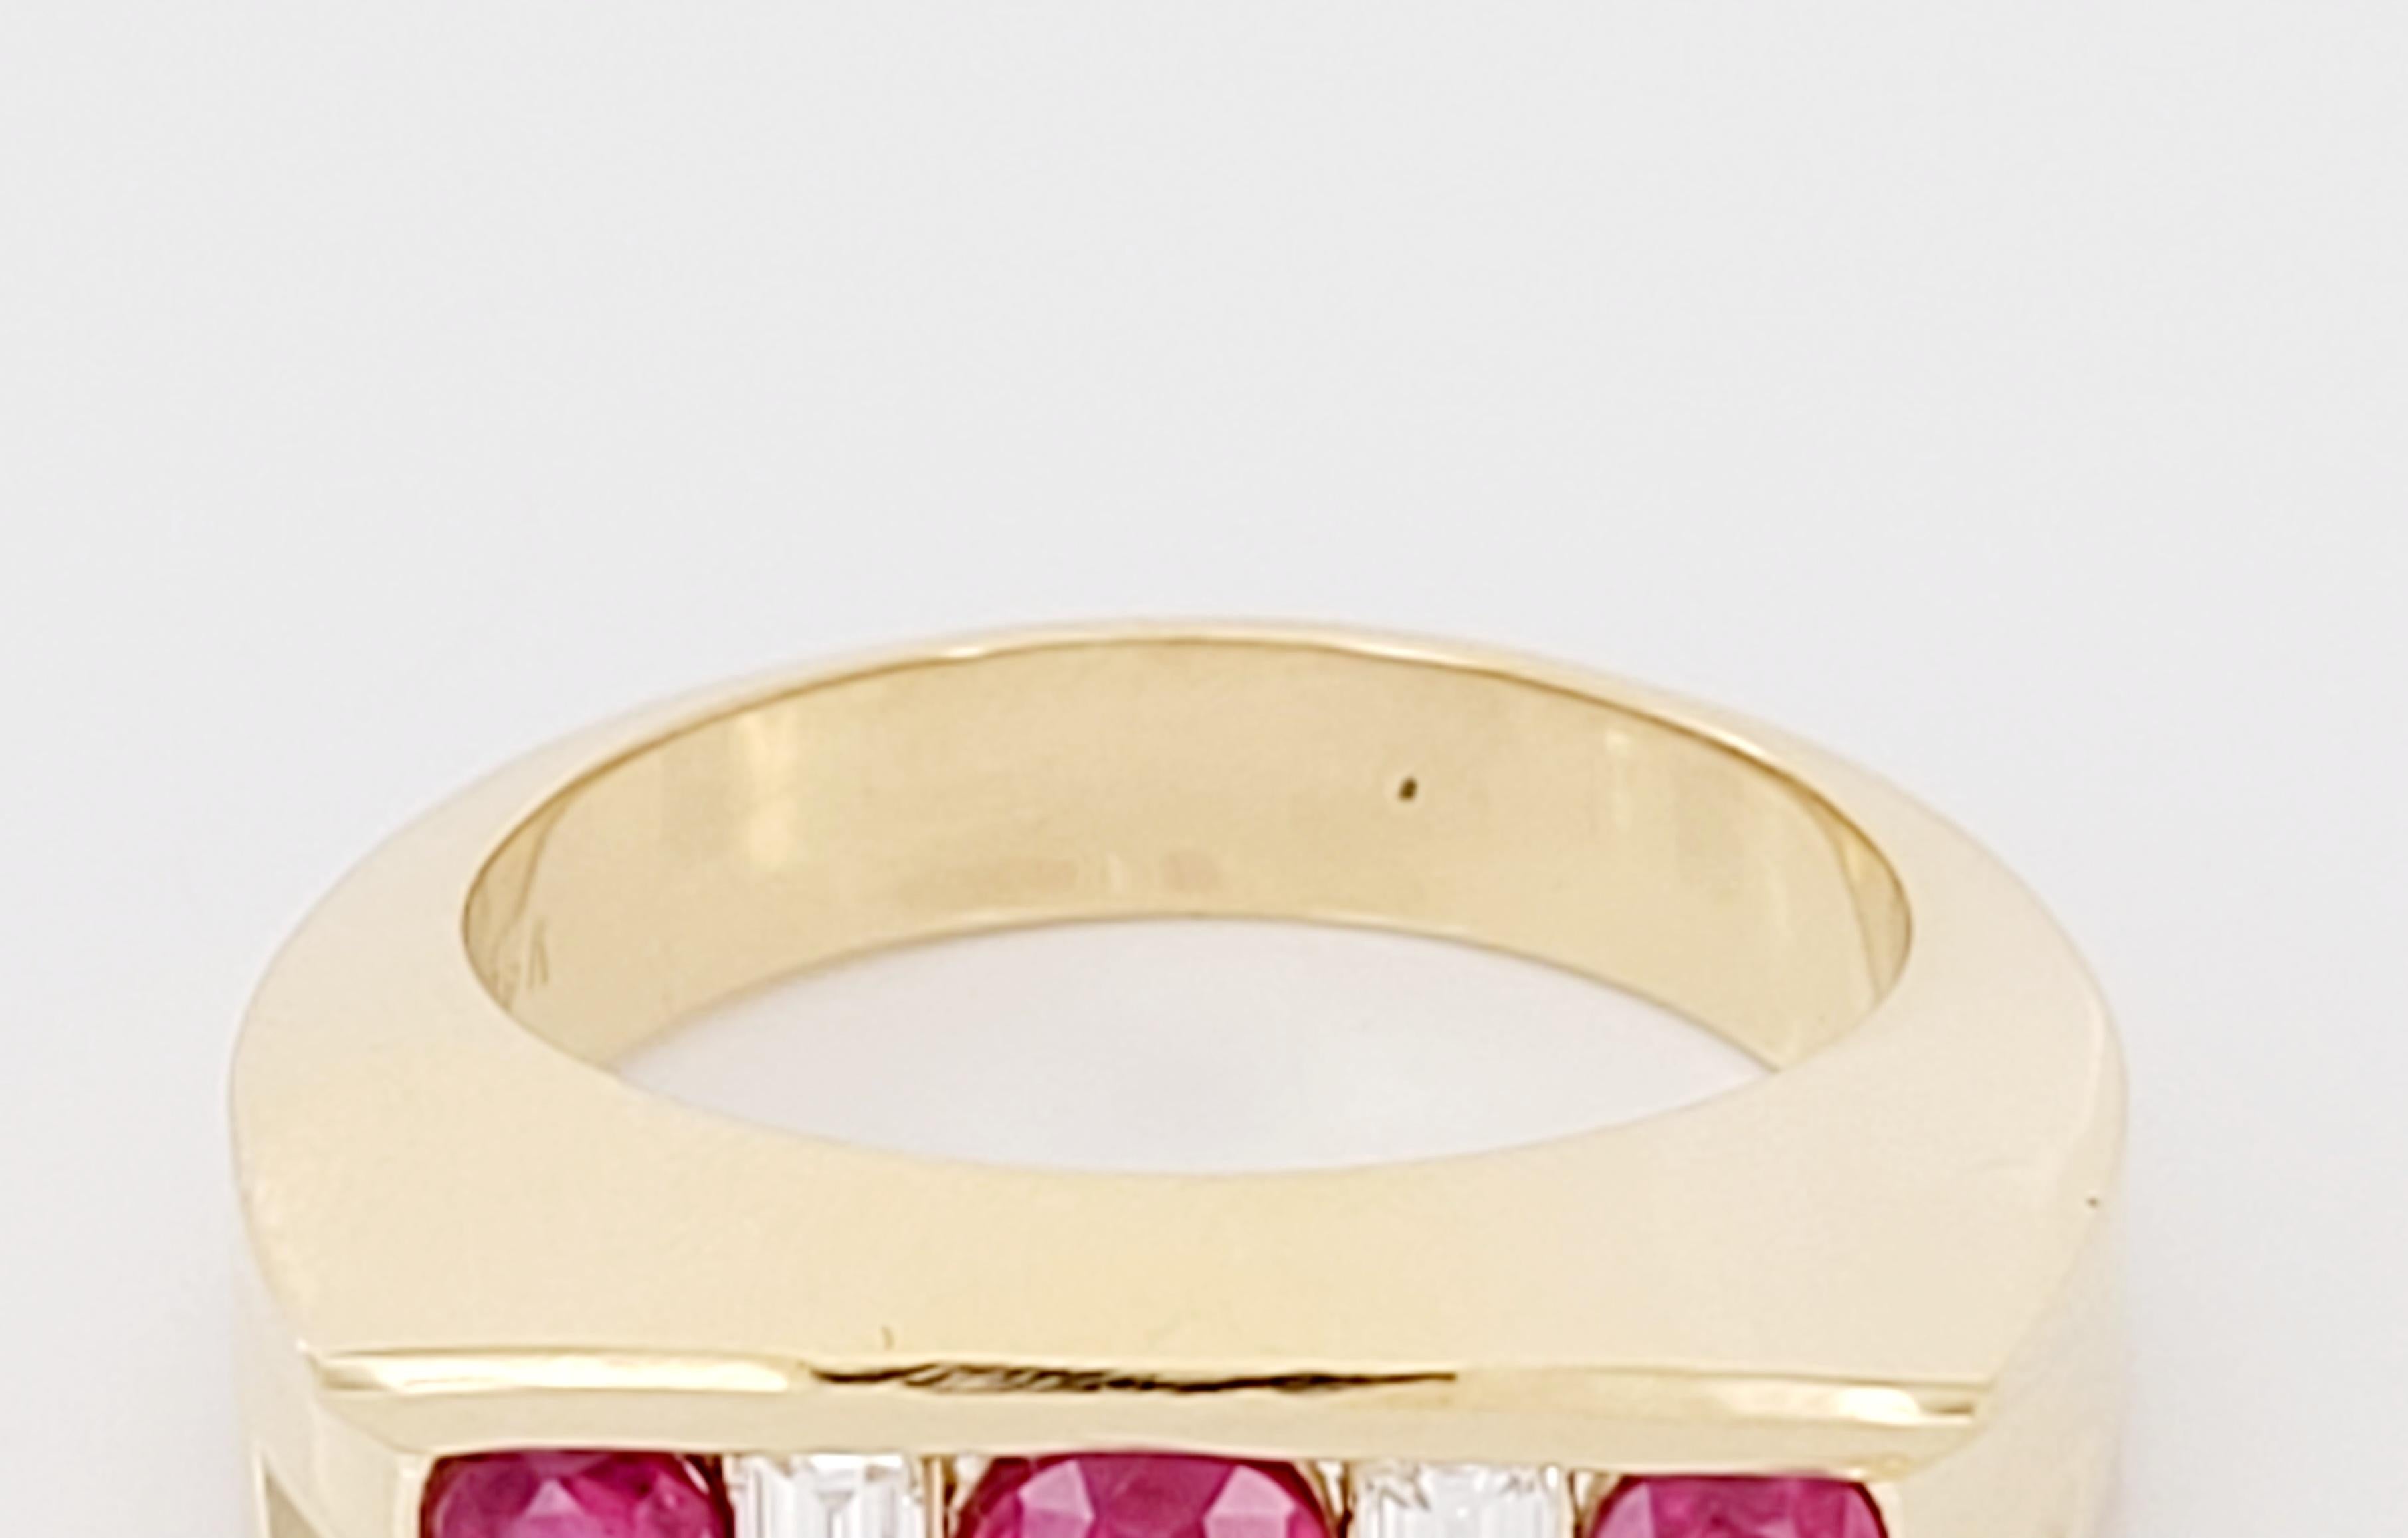 Burmese rubies are the rarest gemstone in the world due to their intense red brilliance.
Burmese Ruby and White Diamond Men Band in 18K Yellow Gold. The Diamonds are cut in emerald shape, in a total of 1.5carat weight for the two stones. The red